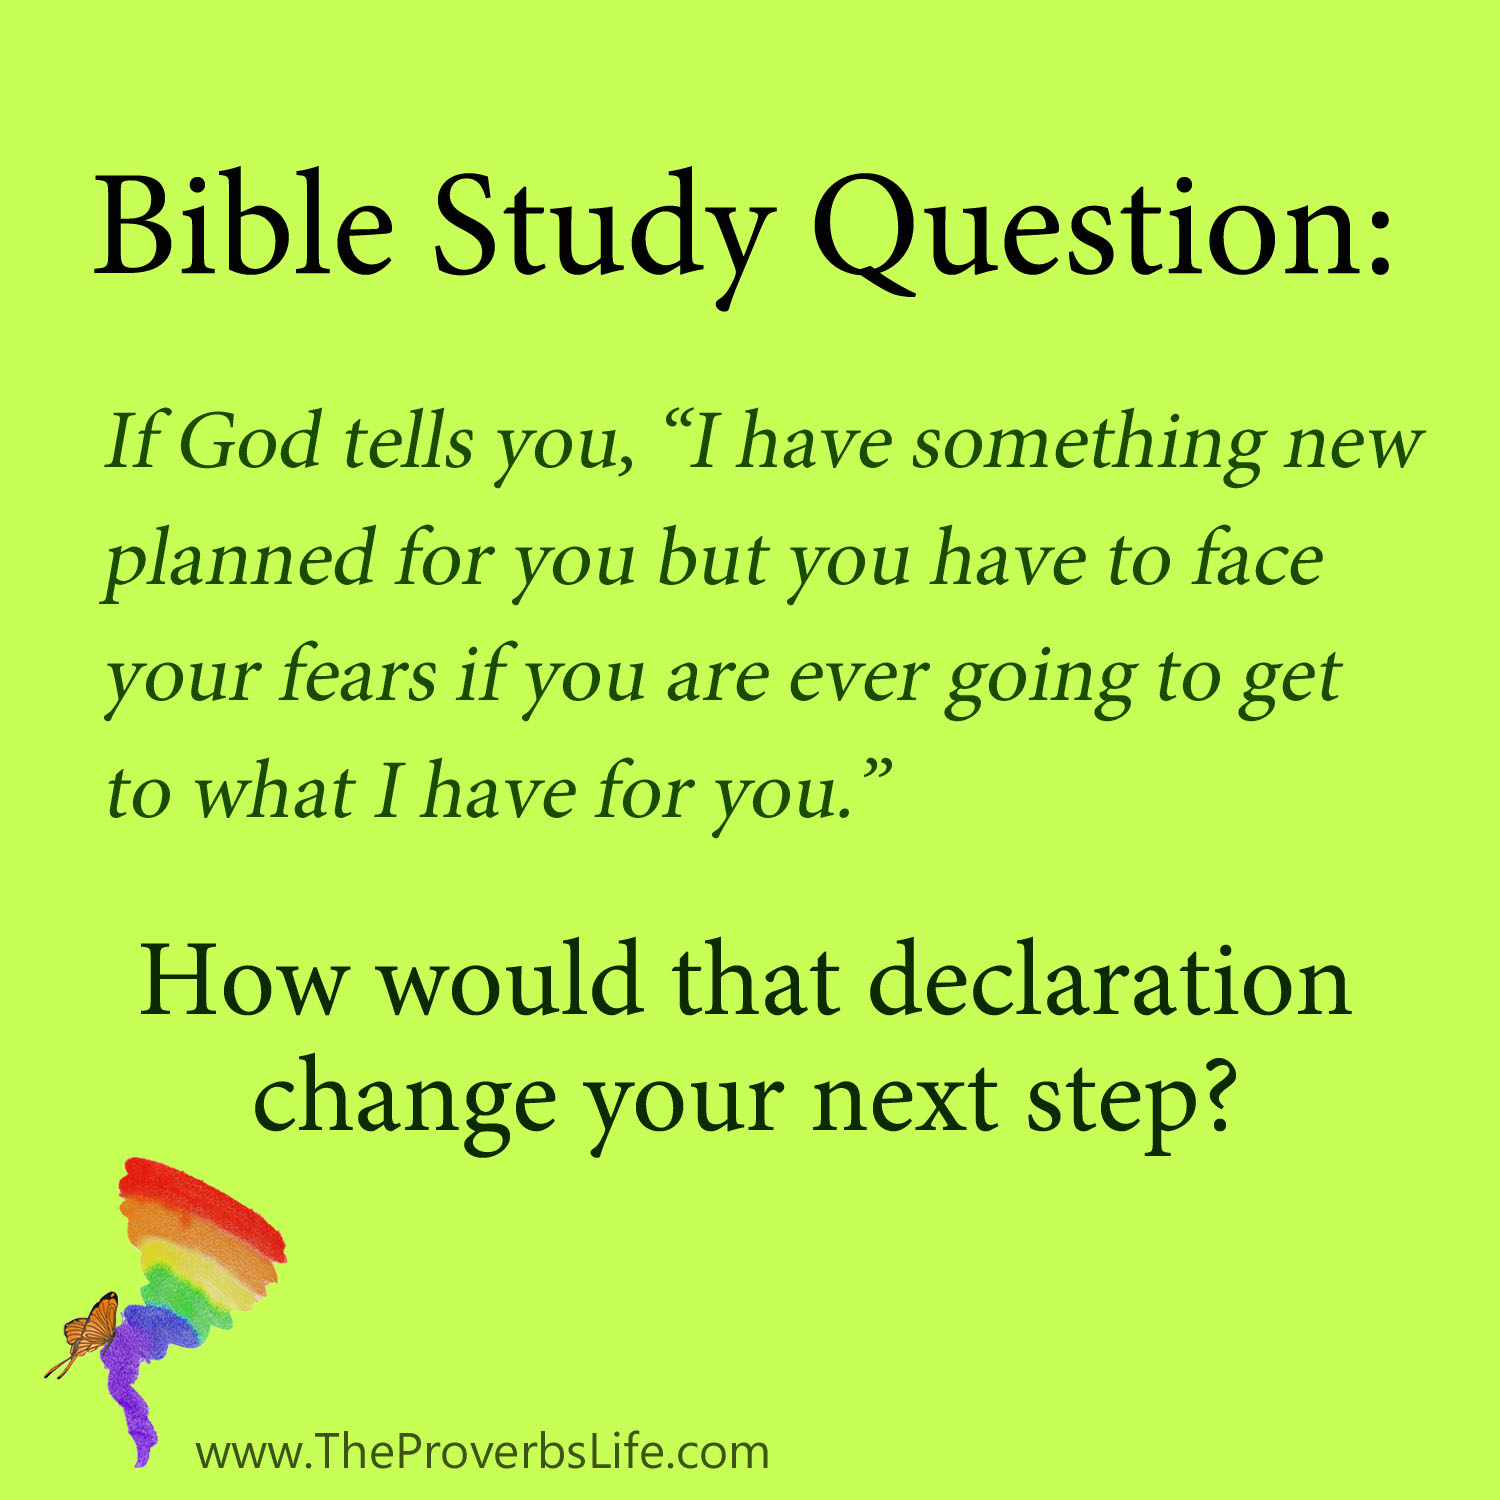 Bible Study Question - face your fears